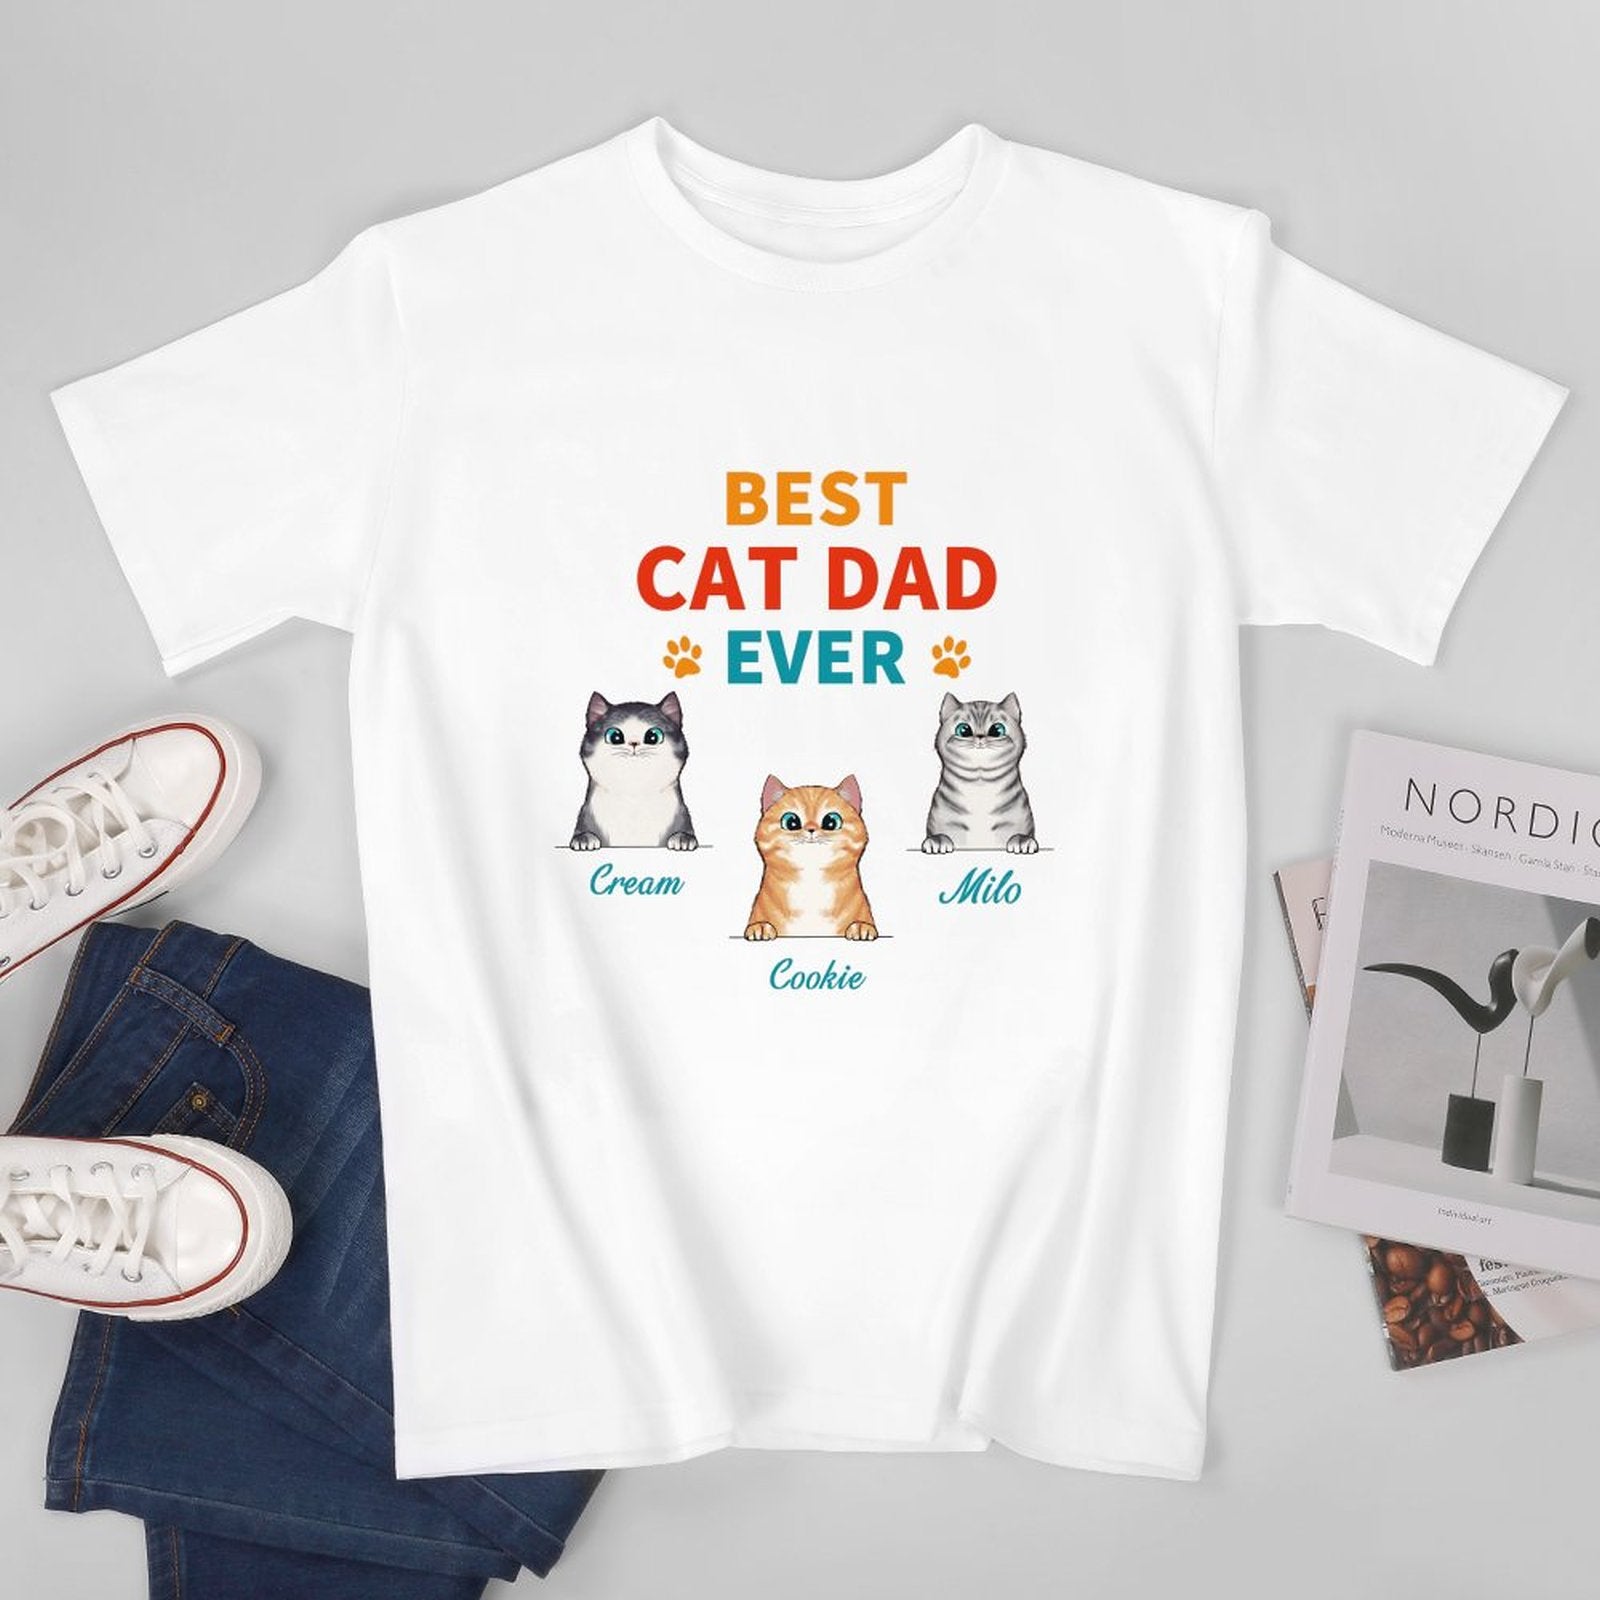 Personalized Custom T-Shirt - Gift For Men, Short Sleeve Gifts for Cat Lovers, Cat Dad, Father's Day Gifts - colorfulcustom